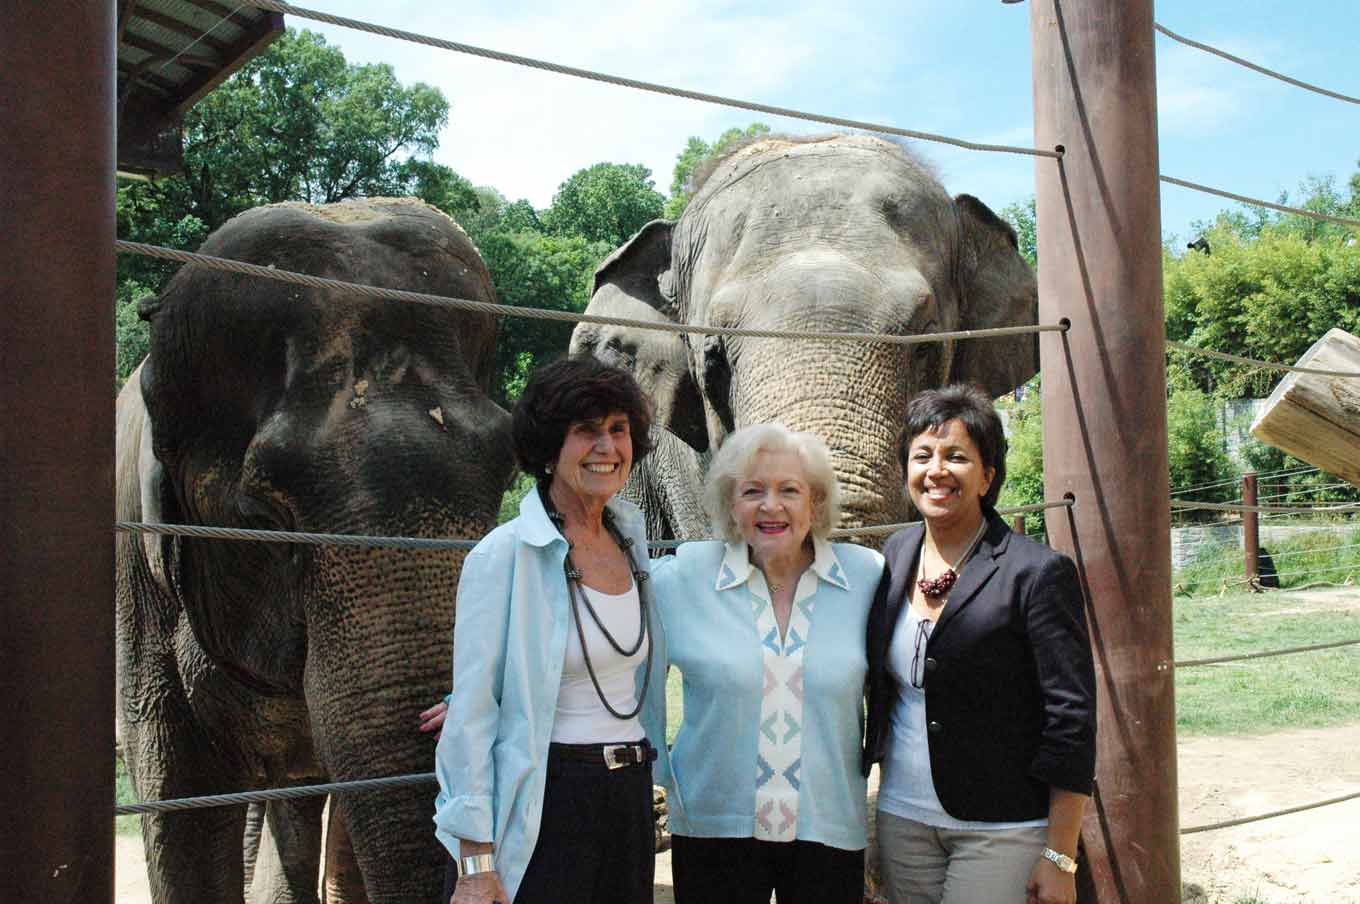 Betty White with elephants at the zoo